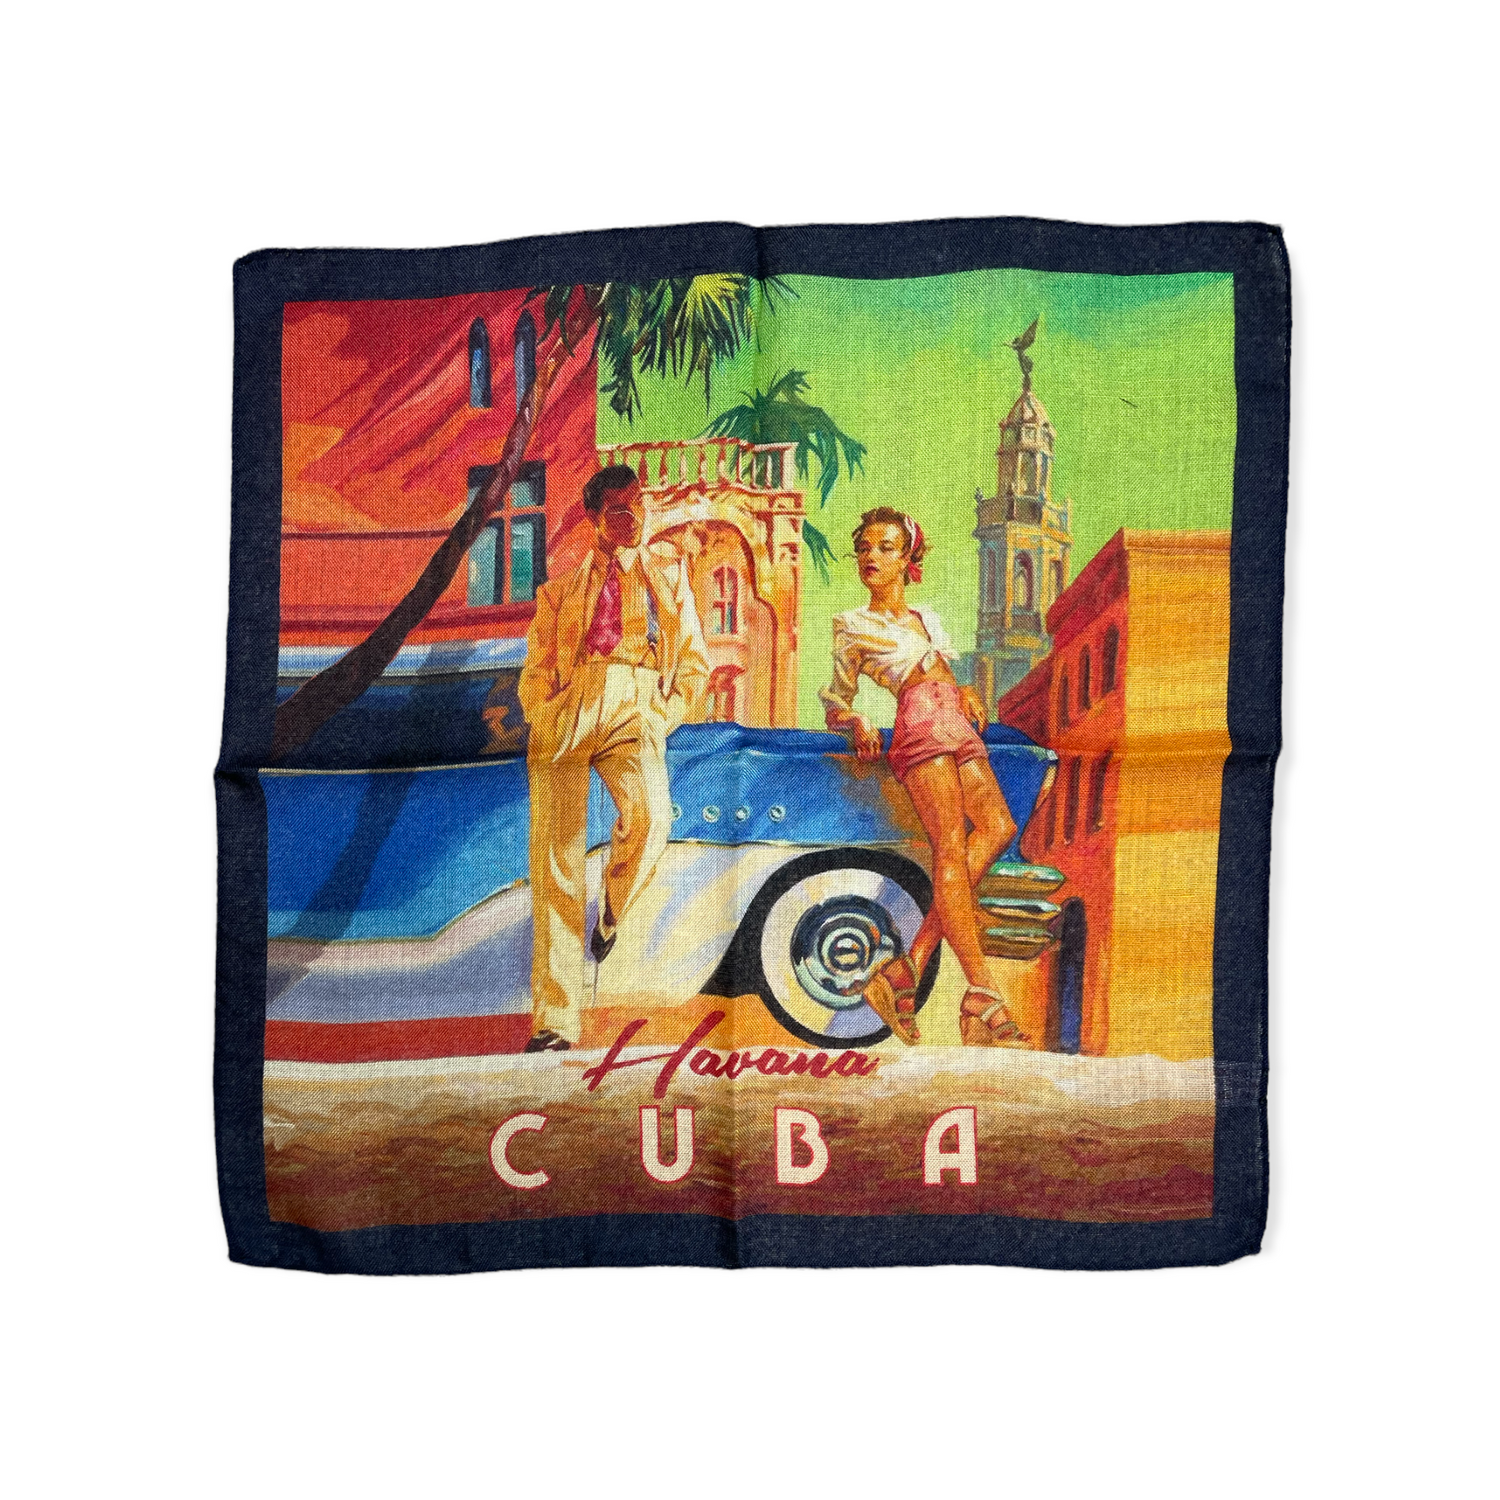 New designs in beautiful and colorful pocket square for your new sport jacket or suit. Adding color and casualness to any outfit these pocket squares depict different exotic cities across the world. Here we have Havana, Cuba through the eyes of artist Kai Carpenter in the heyday of luxury hotels, gambling casinos and white sand beaches. Hand rolled edge. Made in Italy. 14 x14 inches.